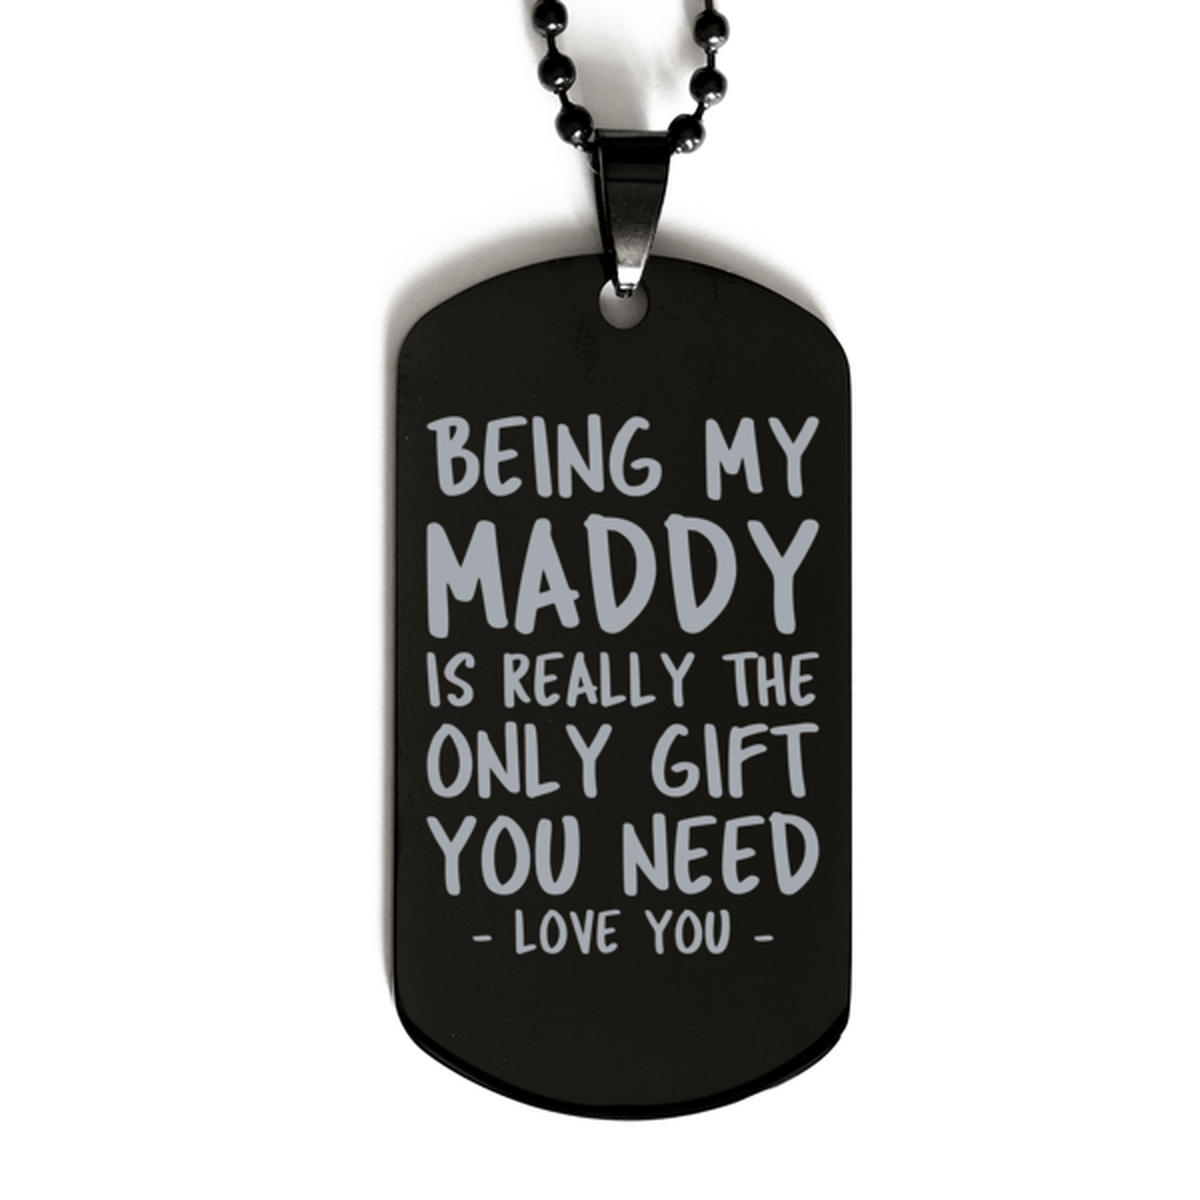 Funny Maddy Black Dog Tag Necklace, Being My Maddy Is Really the Only Gift You Need, Best Birthday Gifts for Maddy